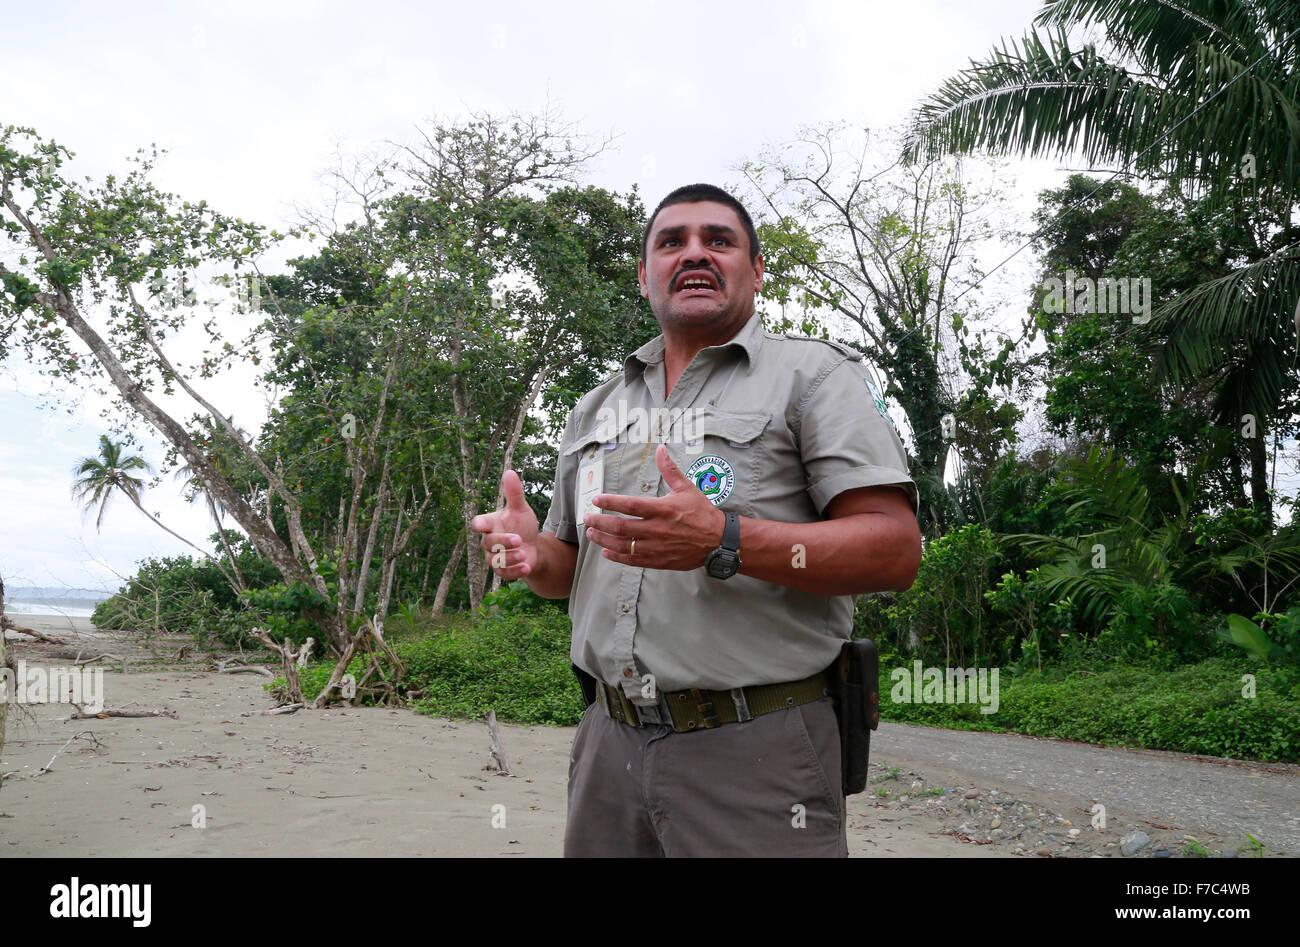 (151129) -- LIMON, Nov. 29, 2015 (Xinhua) -- Image taken on Nov. 24, 2015 shows ranger Cristian Brenes participating in an interview on an eroded beach of Cahuita National Park, in Limon Province, southern Costa Rica. According to the ranger Cristian Brenes, rising sea levels and strong waves due to climate change have removed nearly 50 meters of beach along the coast of Cahuita National Park. The case of Cahuita National Park is not the only one in Costa Rica, which has 1,290km of coastline. More than 40 percent of Costa Rican beaches have erosion, a process that has accelerated in the last 1 Stock Photo